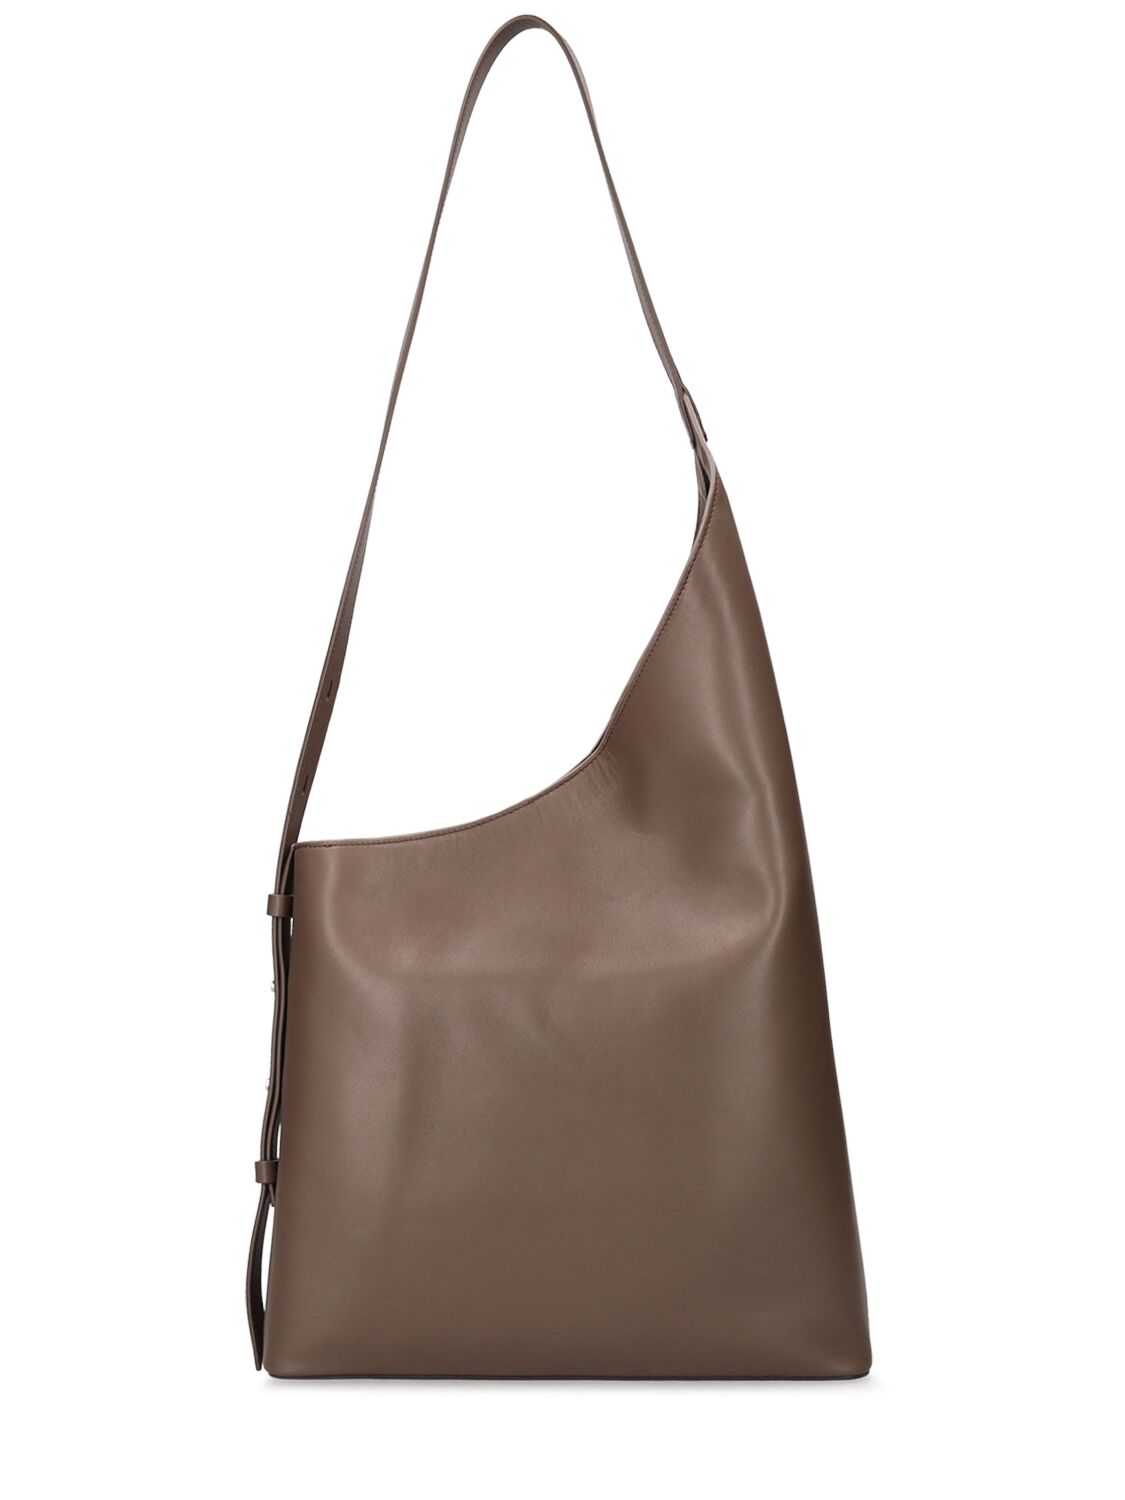 Aesther Ekme Demi Lune Shopper Leather Bag in Brown